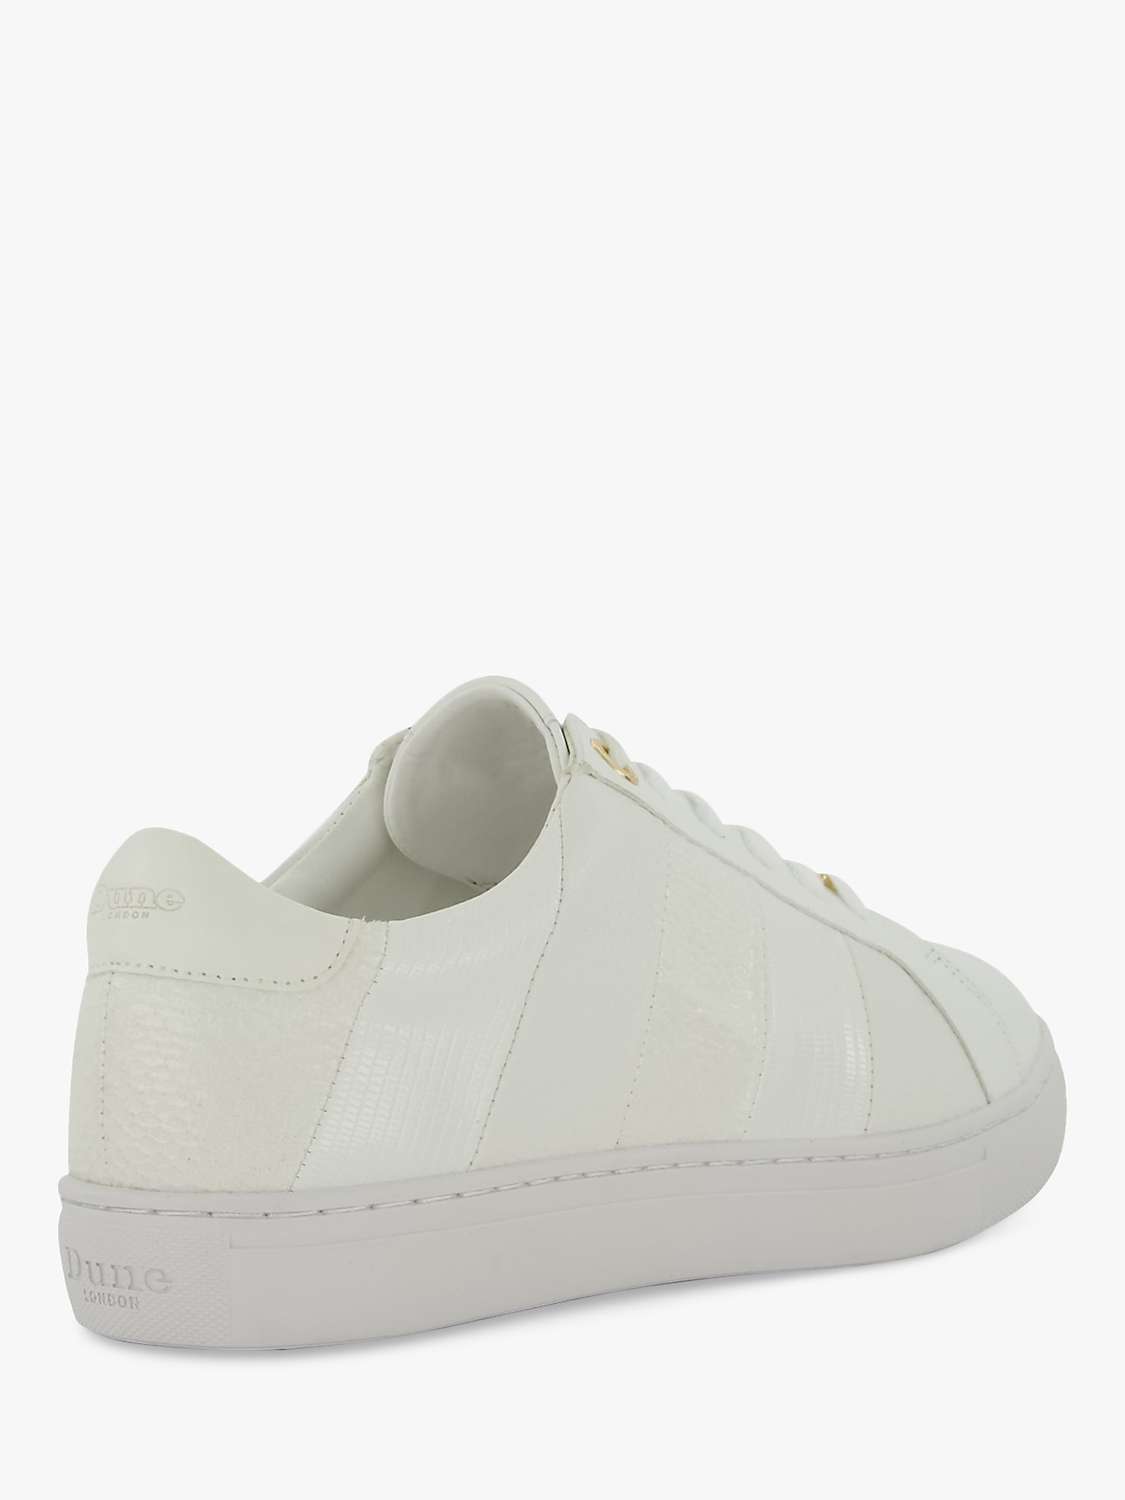 Dune Wide Fit Everleigh Trainers, White at John Lewis & Partners